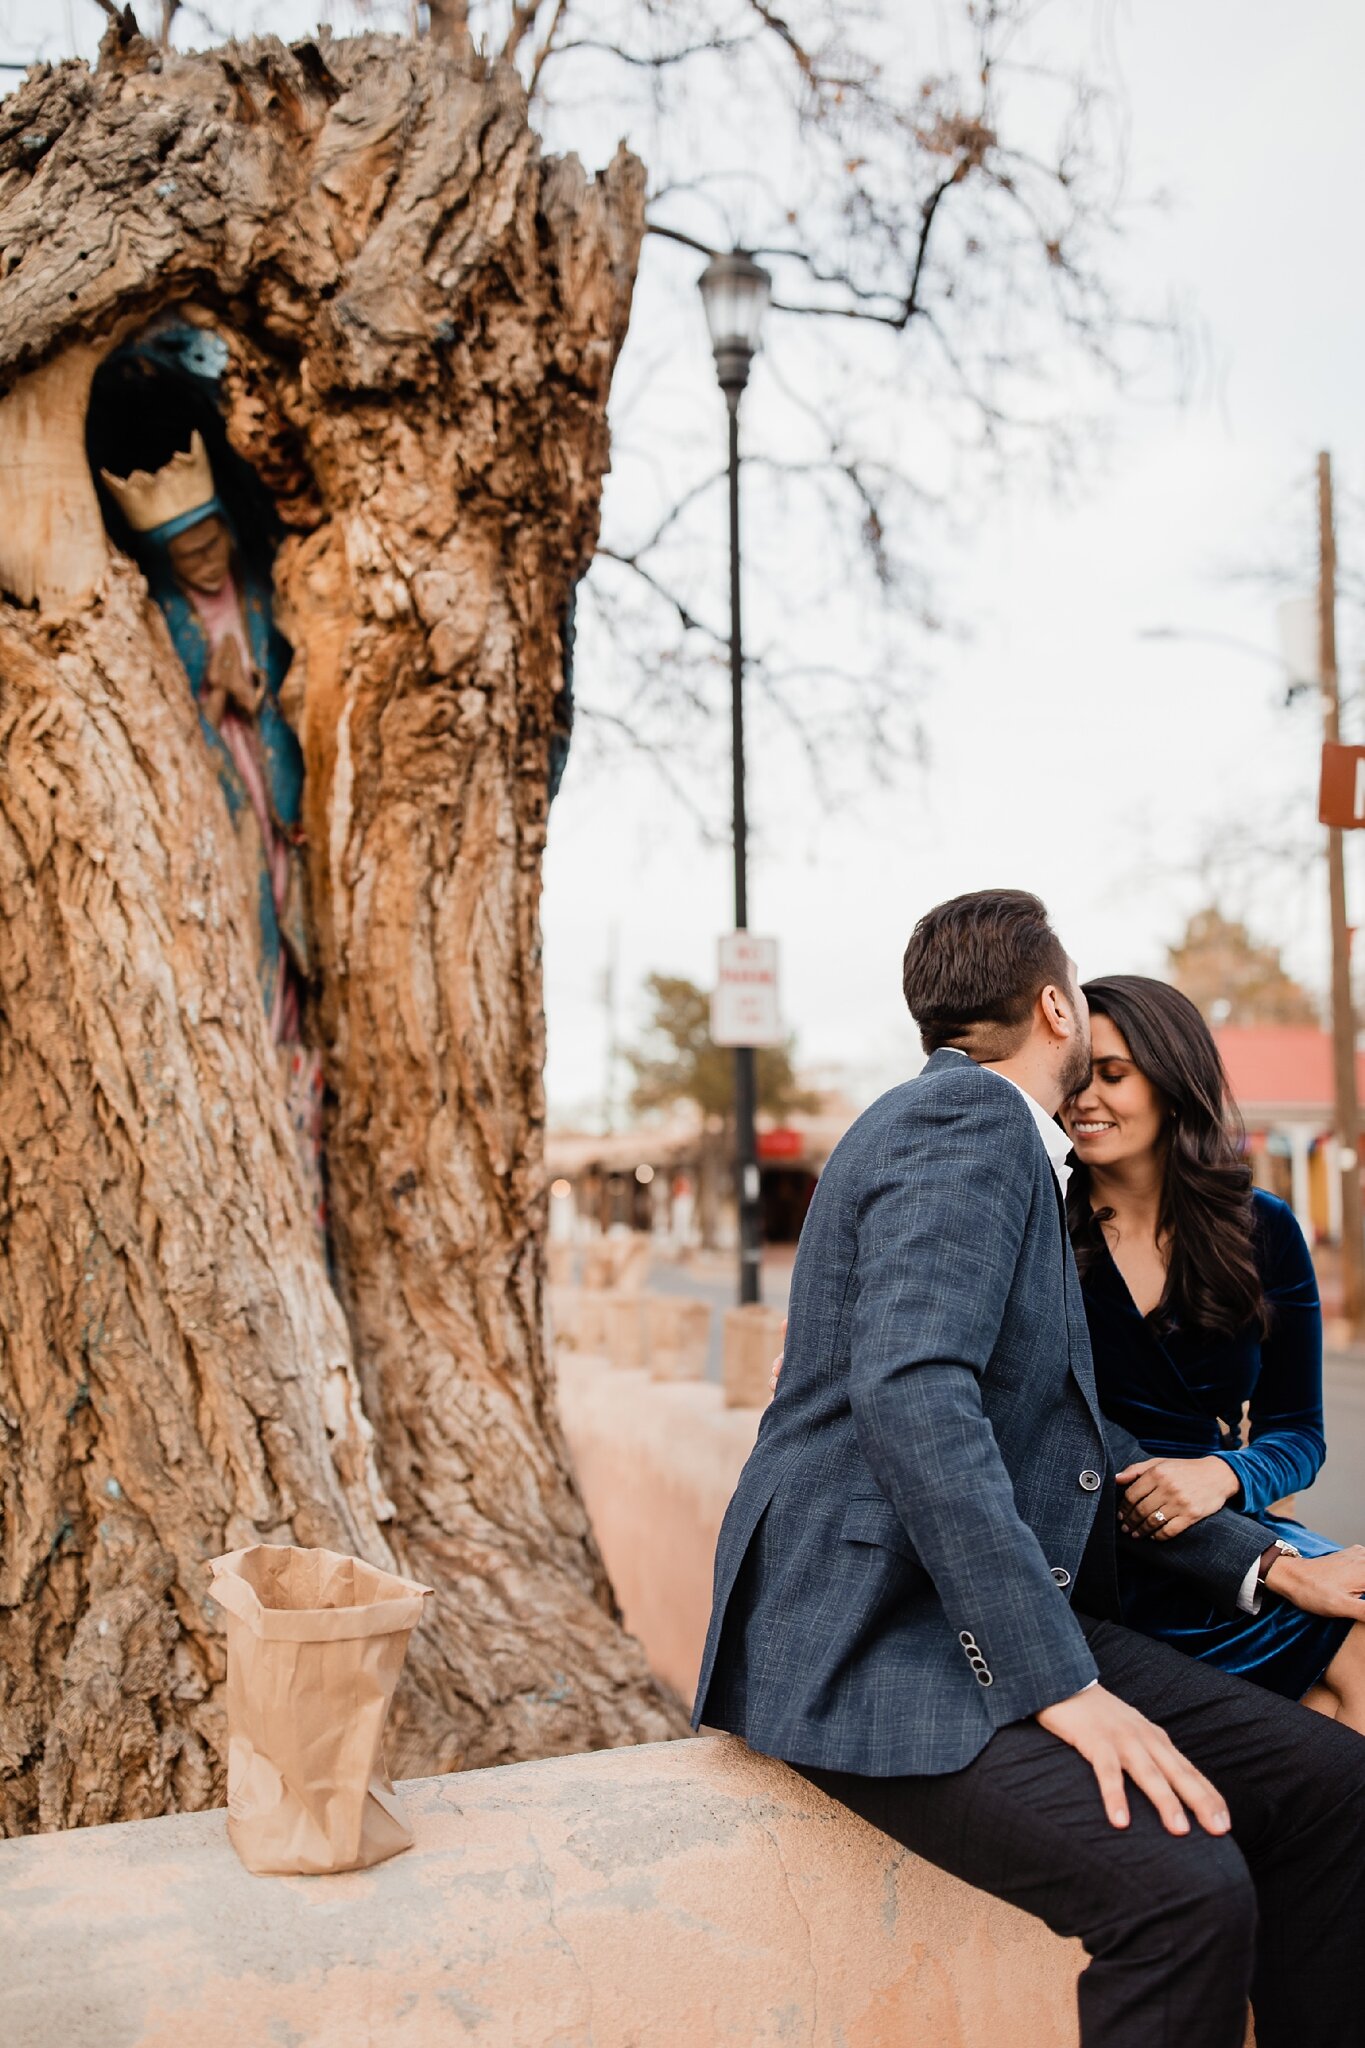 Alicia+lucia+photography+-+albuquerque+wedding+photographer+-+santa+fe+wedding+photography+-+new+mexico+wedding+photographer+-+new+mexico+wedding+-+albuquerque+engagement+-+old+town+engagement+-+christmas+engagement+-+holiday+engagement_0025.jpg